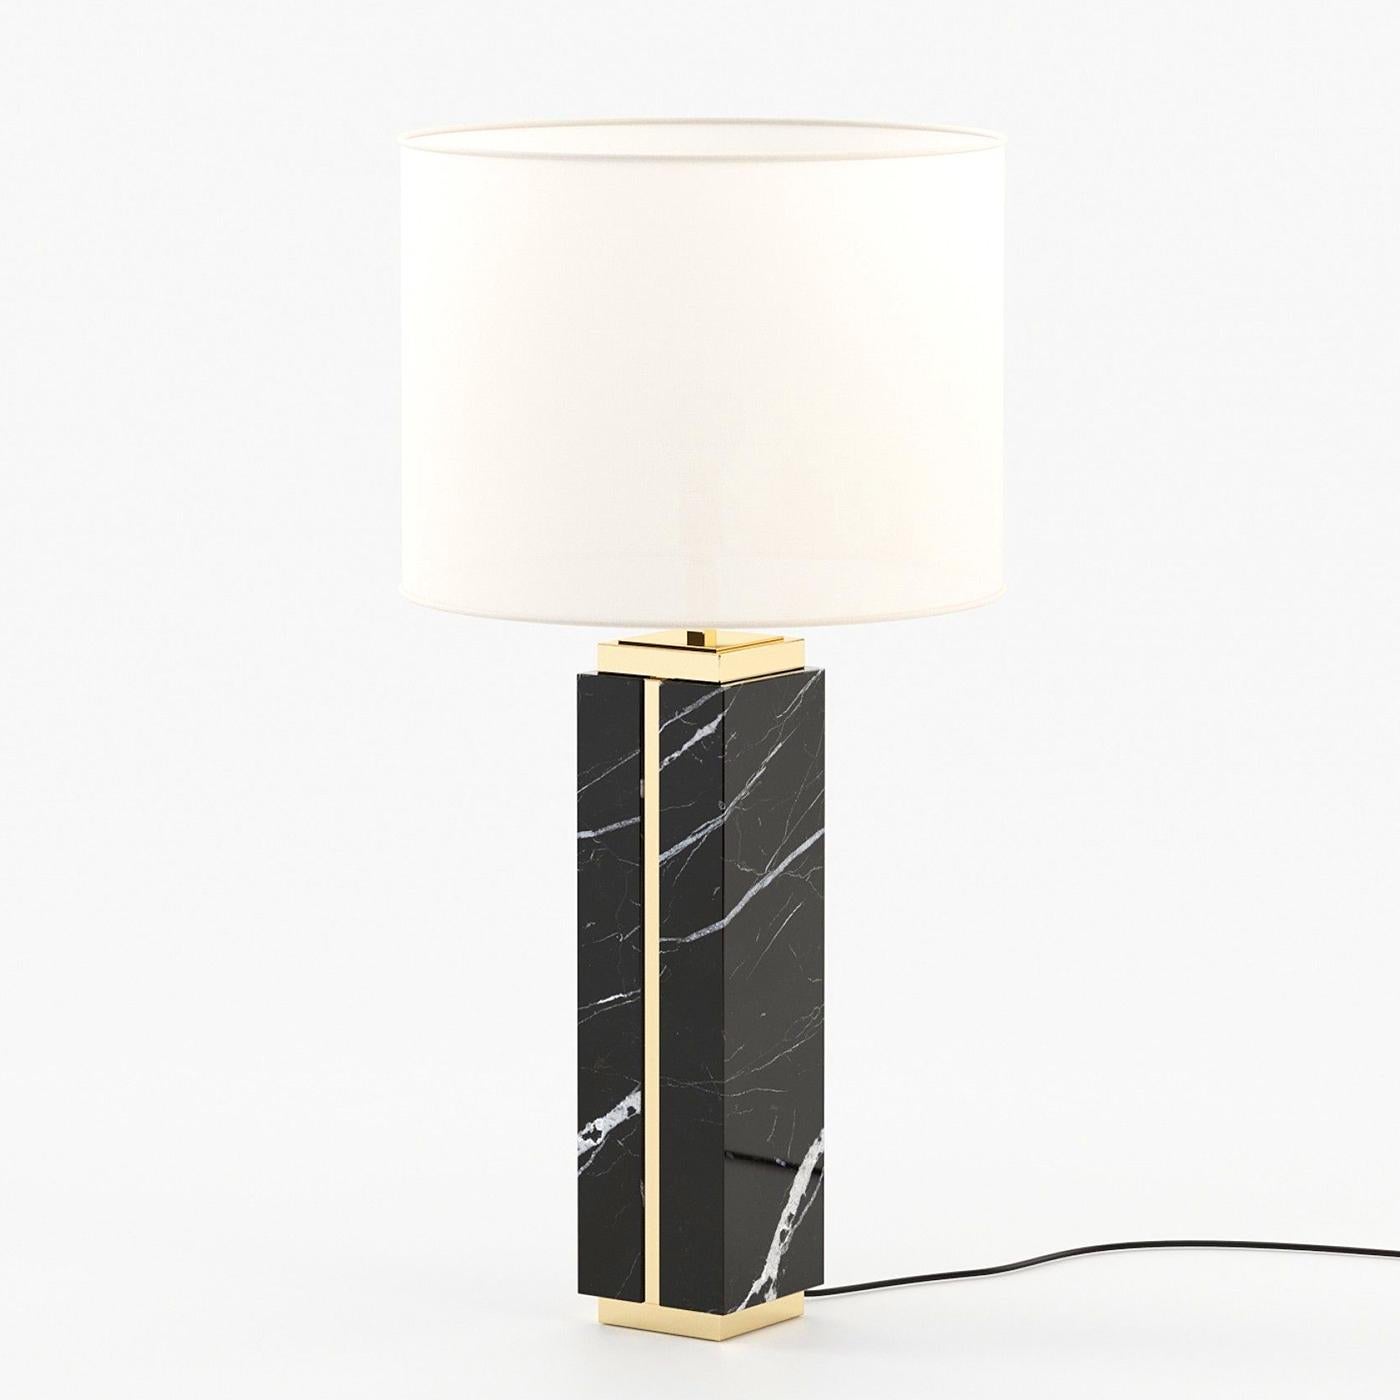 Table Lamp Dounia Marble with black marble and
polished stainless steel base in, stainless steel in 
gold finish, including a white lamp shade.
1 bulb, lamp holder type E27, max 40 watt, bulb not
included. Also available with other marble